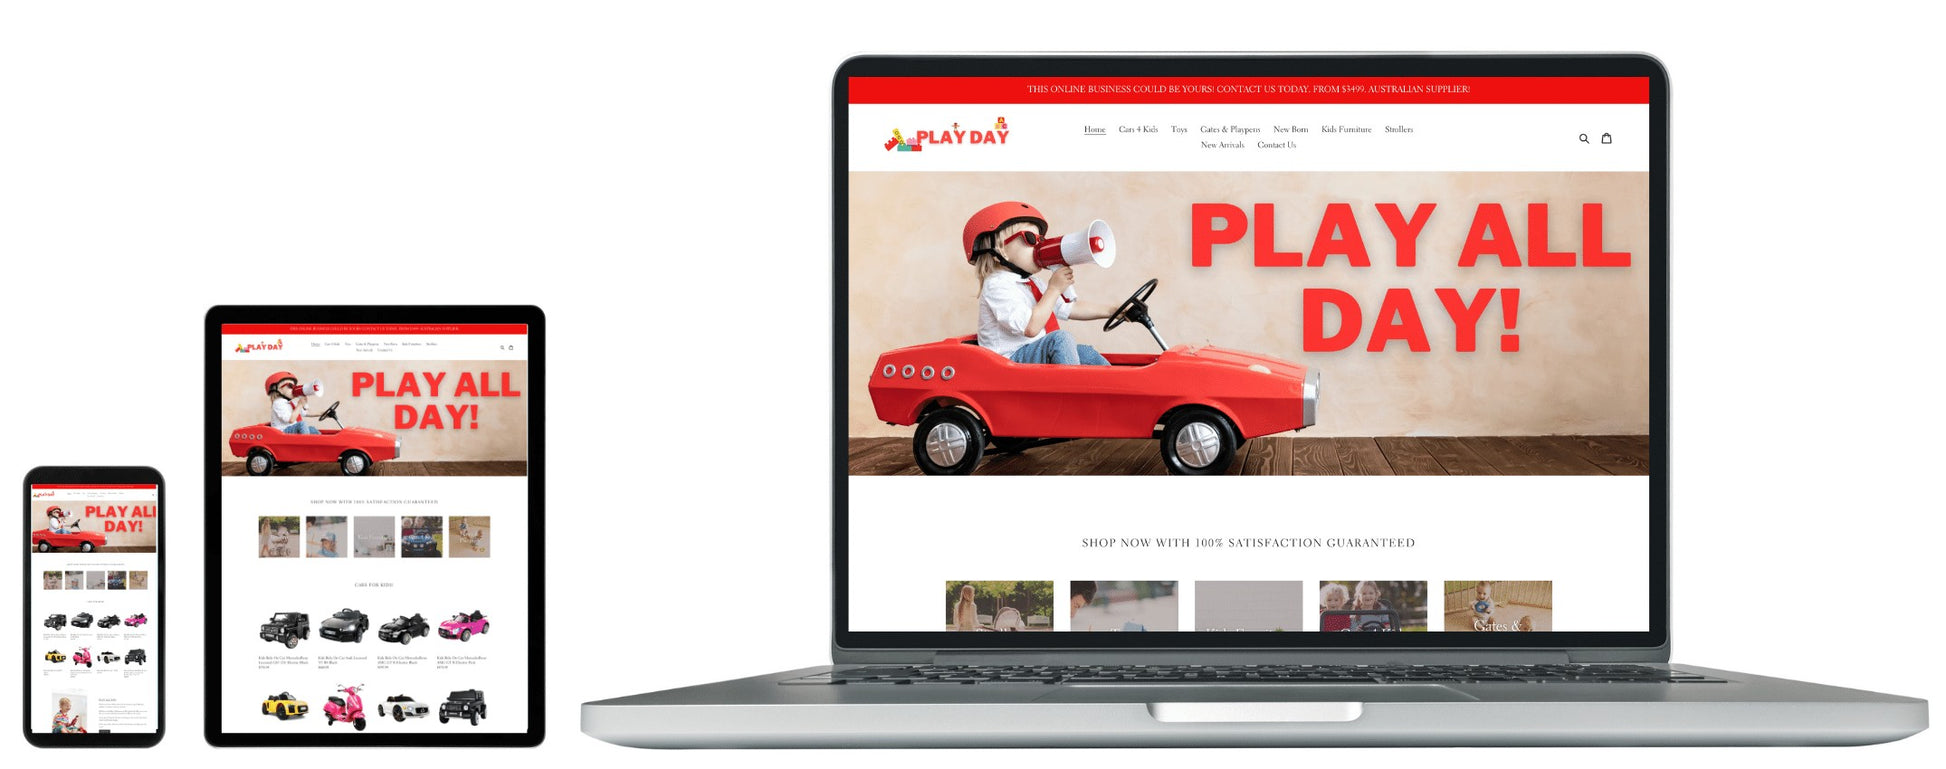 Play Day - Kids Toys - 100% Australian Based Supplier Tyack Ecommerce Solutions